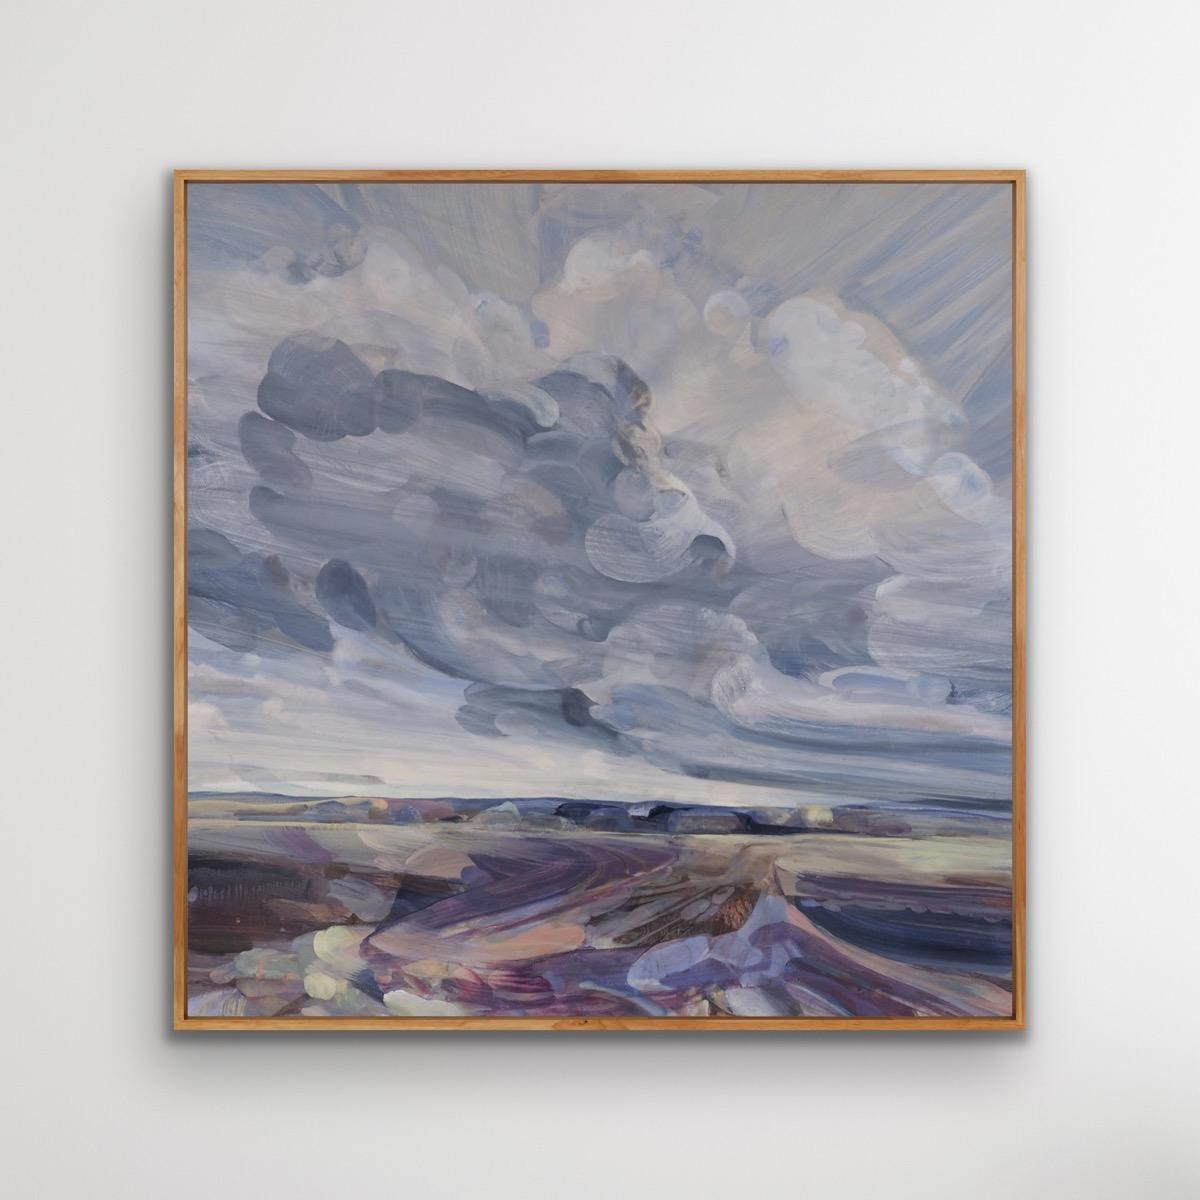 The Colours in the Shadows is an original oil painting by artist Louisa Longstaff-Scales. The movement and colour palette of this artwork make for an atmospheric Norfolk landscape painting.

Discover more original artwork by Louise Longstaff-Scales